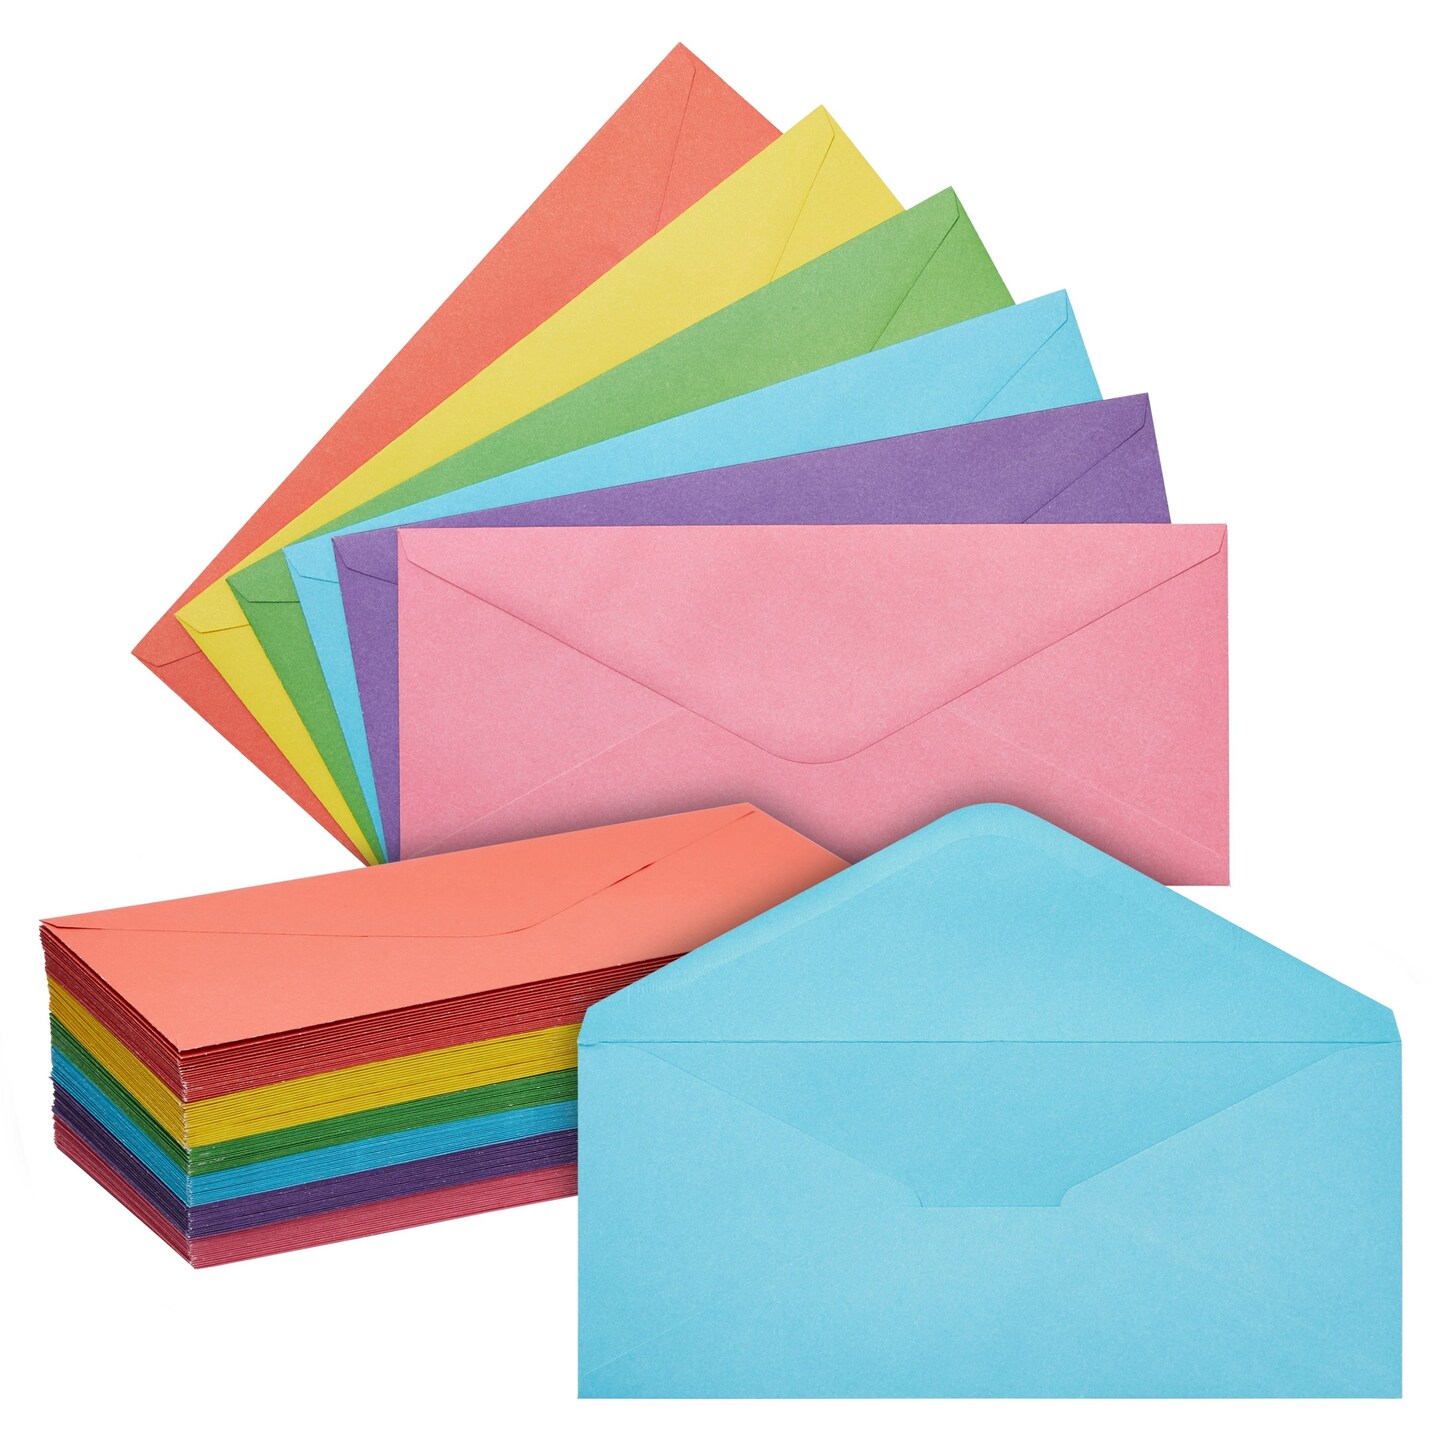 120-Pack Size 10 Business Mailing Colorful Envelopes in 6 Assorted Colors, Gummed Seal for Invitations, Checks, Invoices, Letters, Notes, Photos (4.125 x 9.5 Inches)